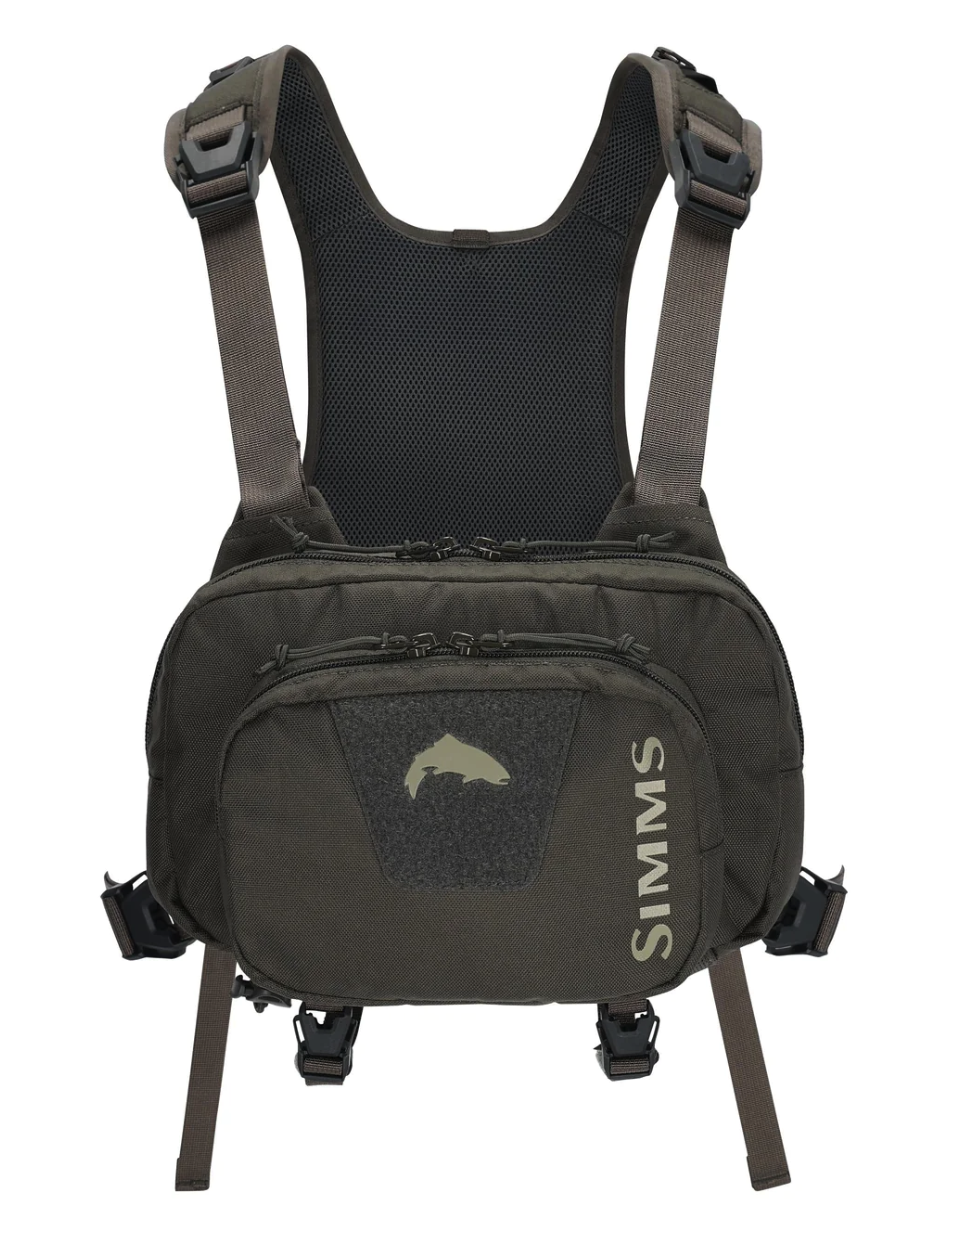 Shop new Simms fishing chest packs online.